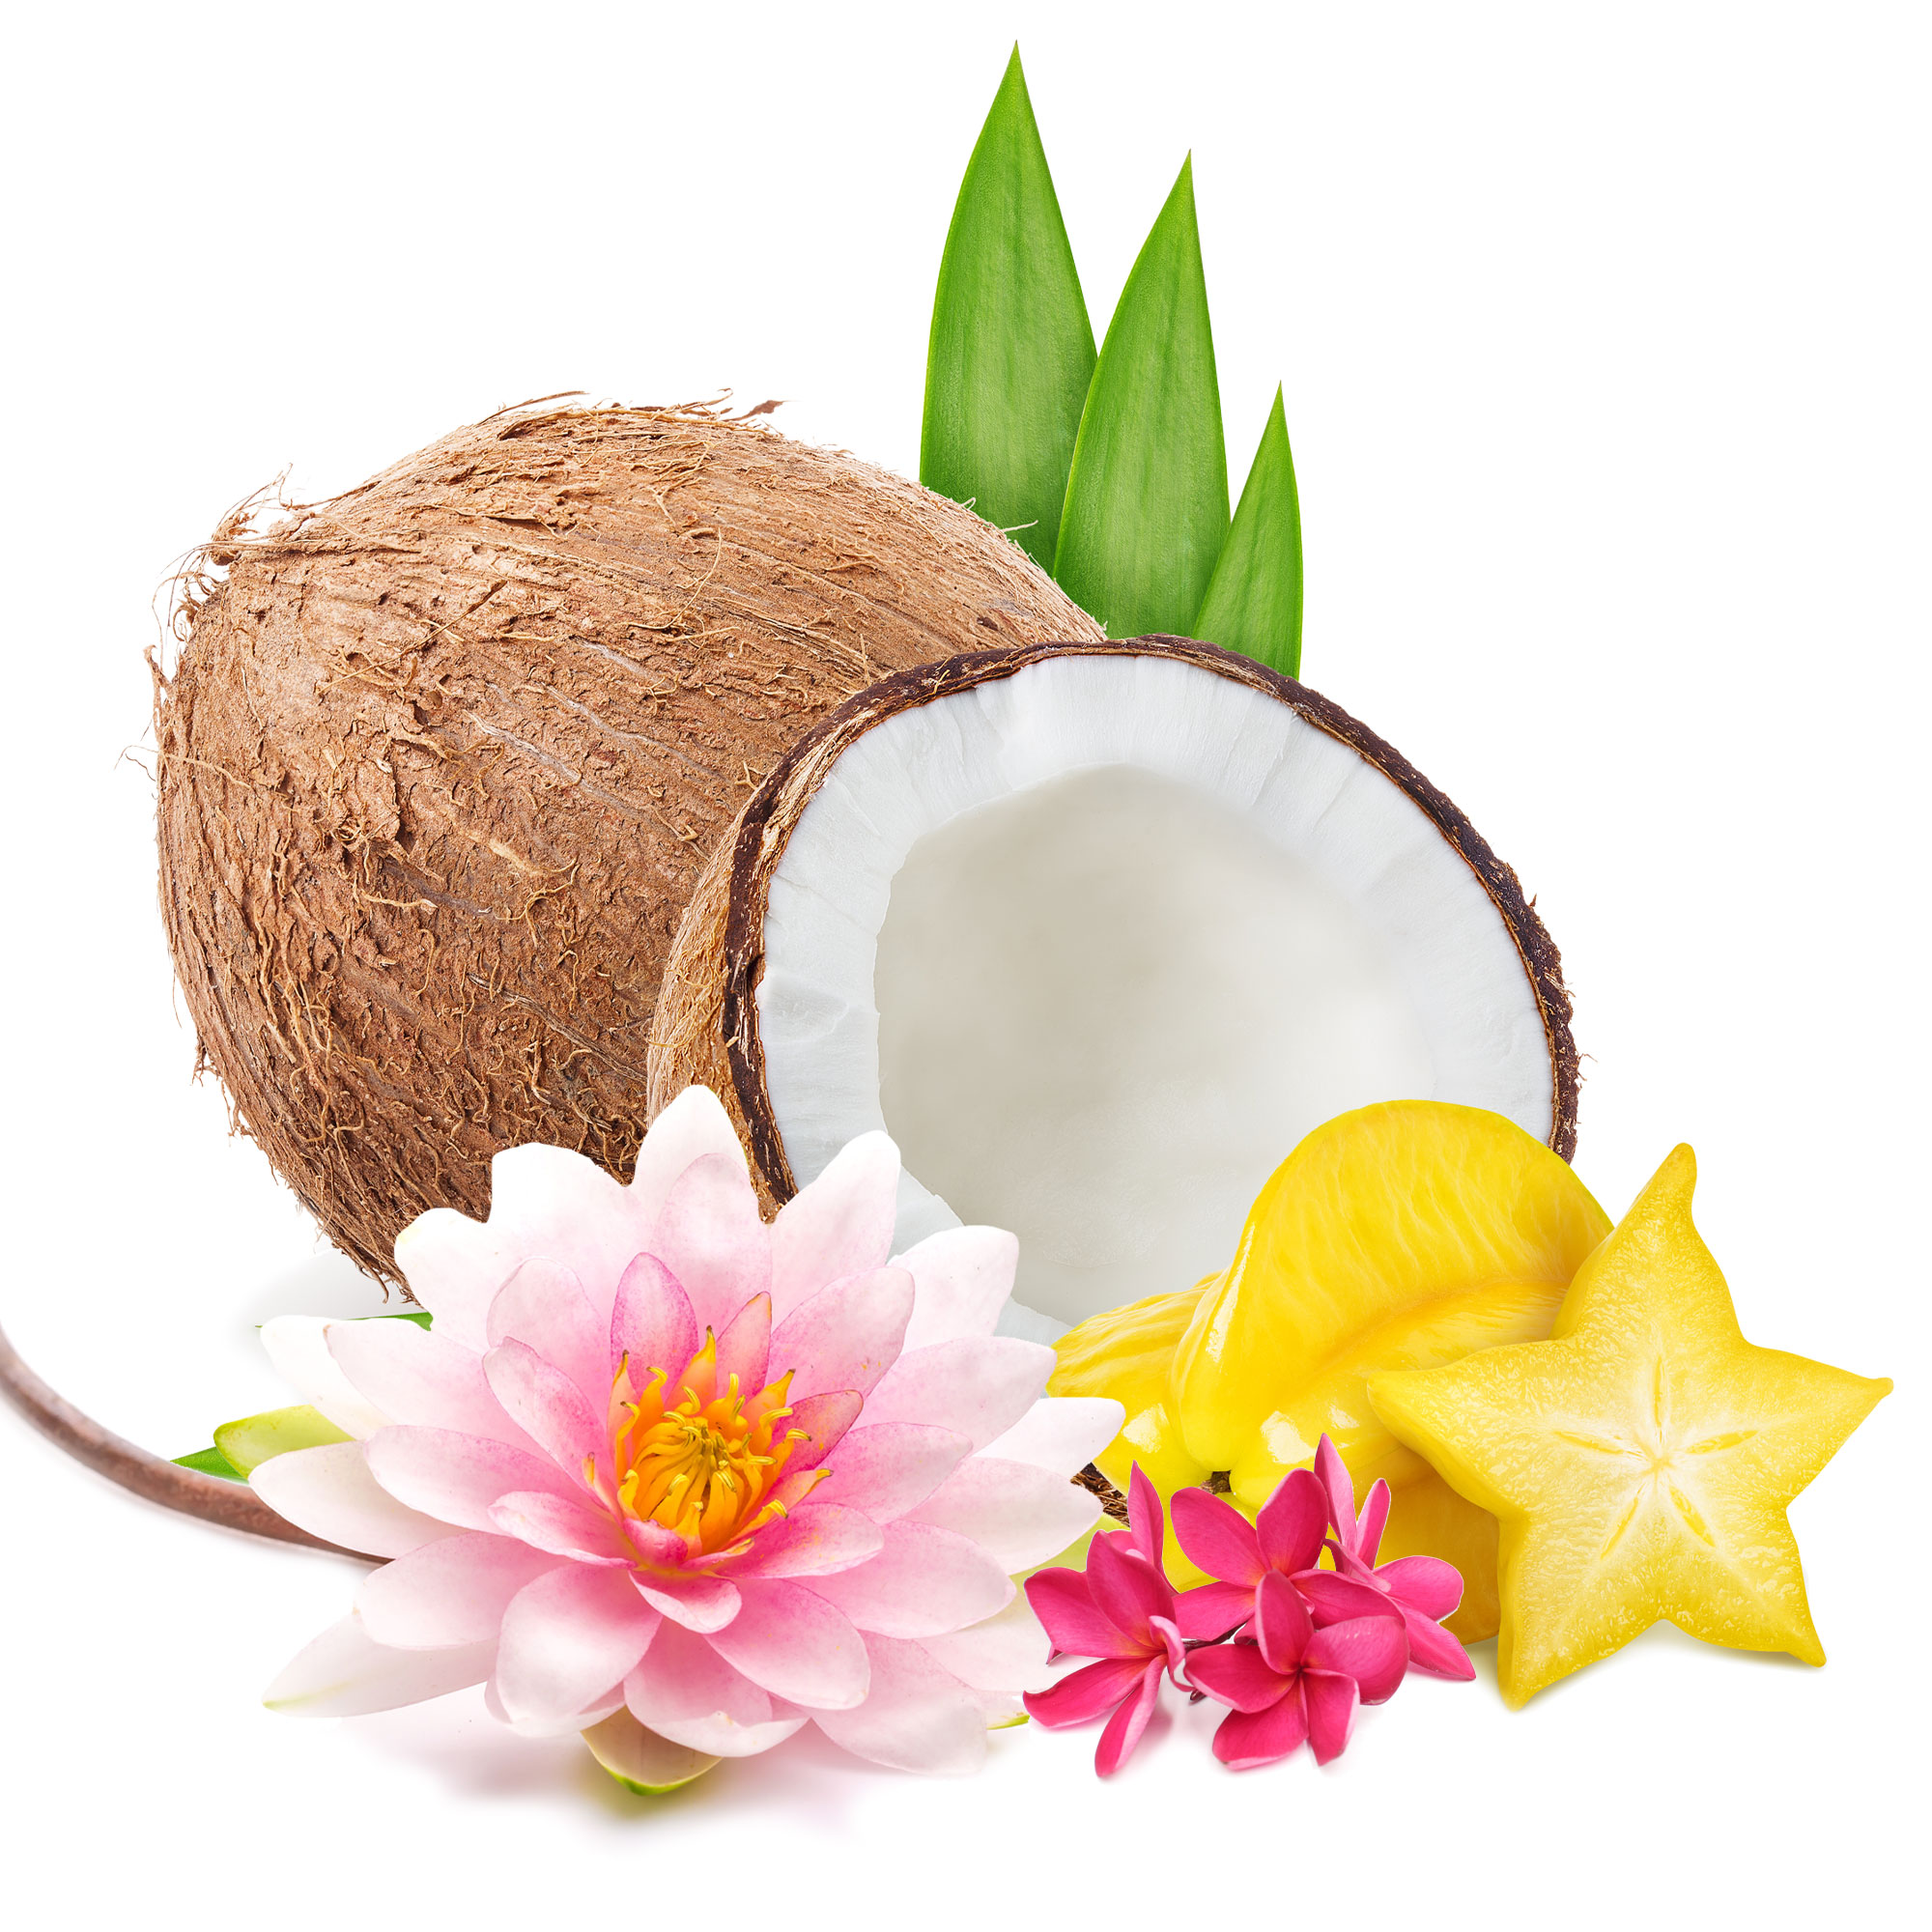 Pure Paradise Scent Ingredients